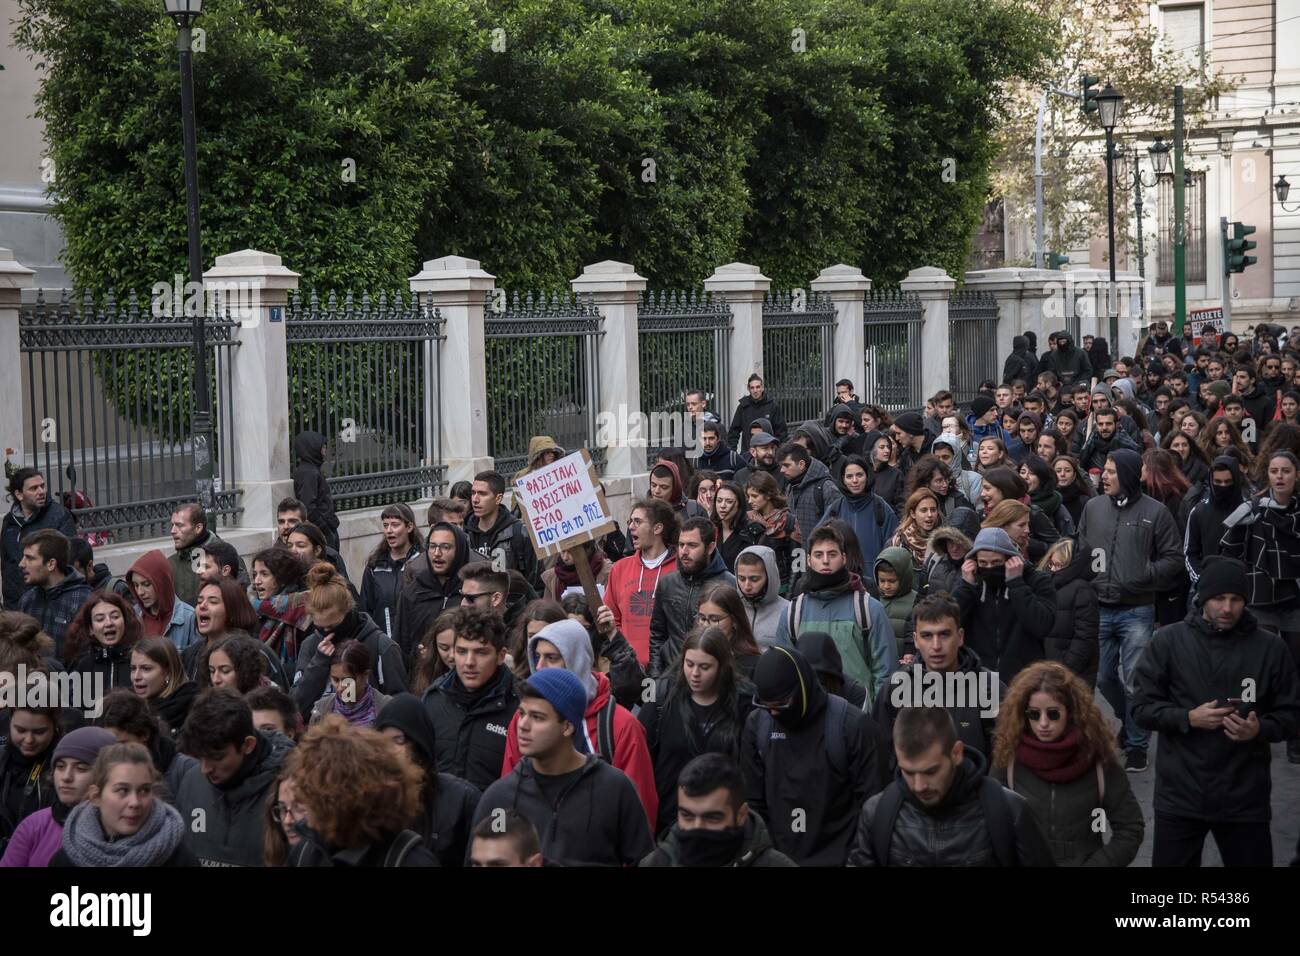 Athens, Greece. 29th Nov, 2018. Protesters are seen walking on the during the protest.Hundreds of students protest against the rise of fascism and racism in schools. Credit: Nikolas Joao Kokovlis/SOPA Images/ZUMA Wire/Alamy Live News Stock Photo